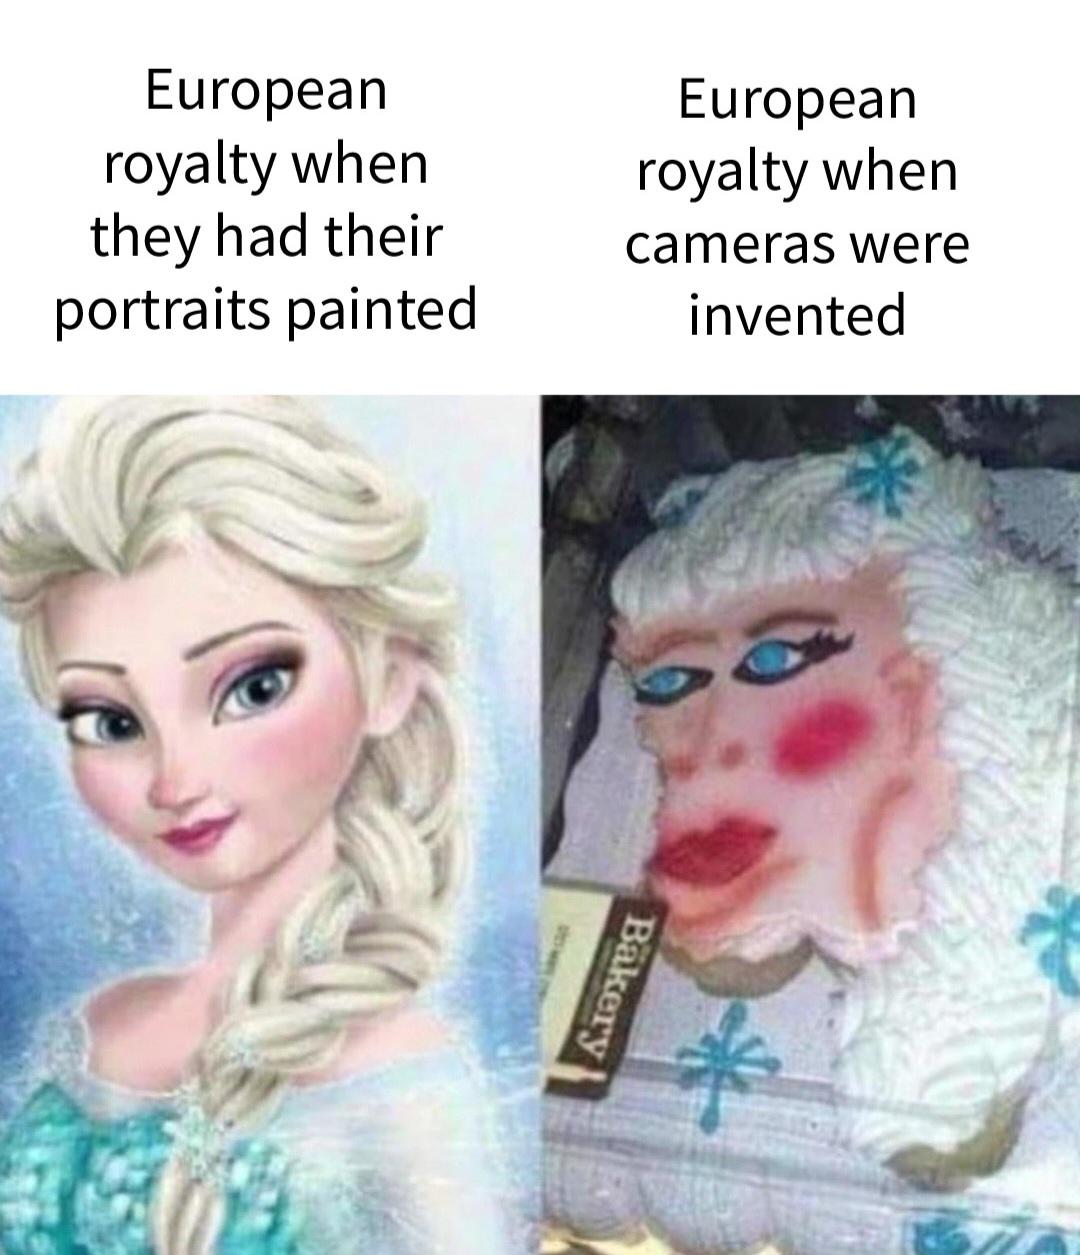 elsa nailed it cake - European royalty when they had their portraits painted European royalty when cameras were invented Bakery